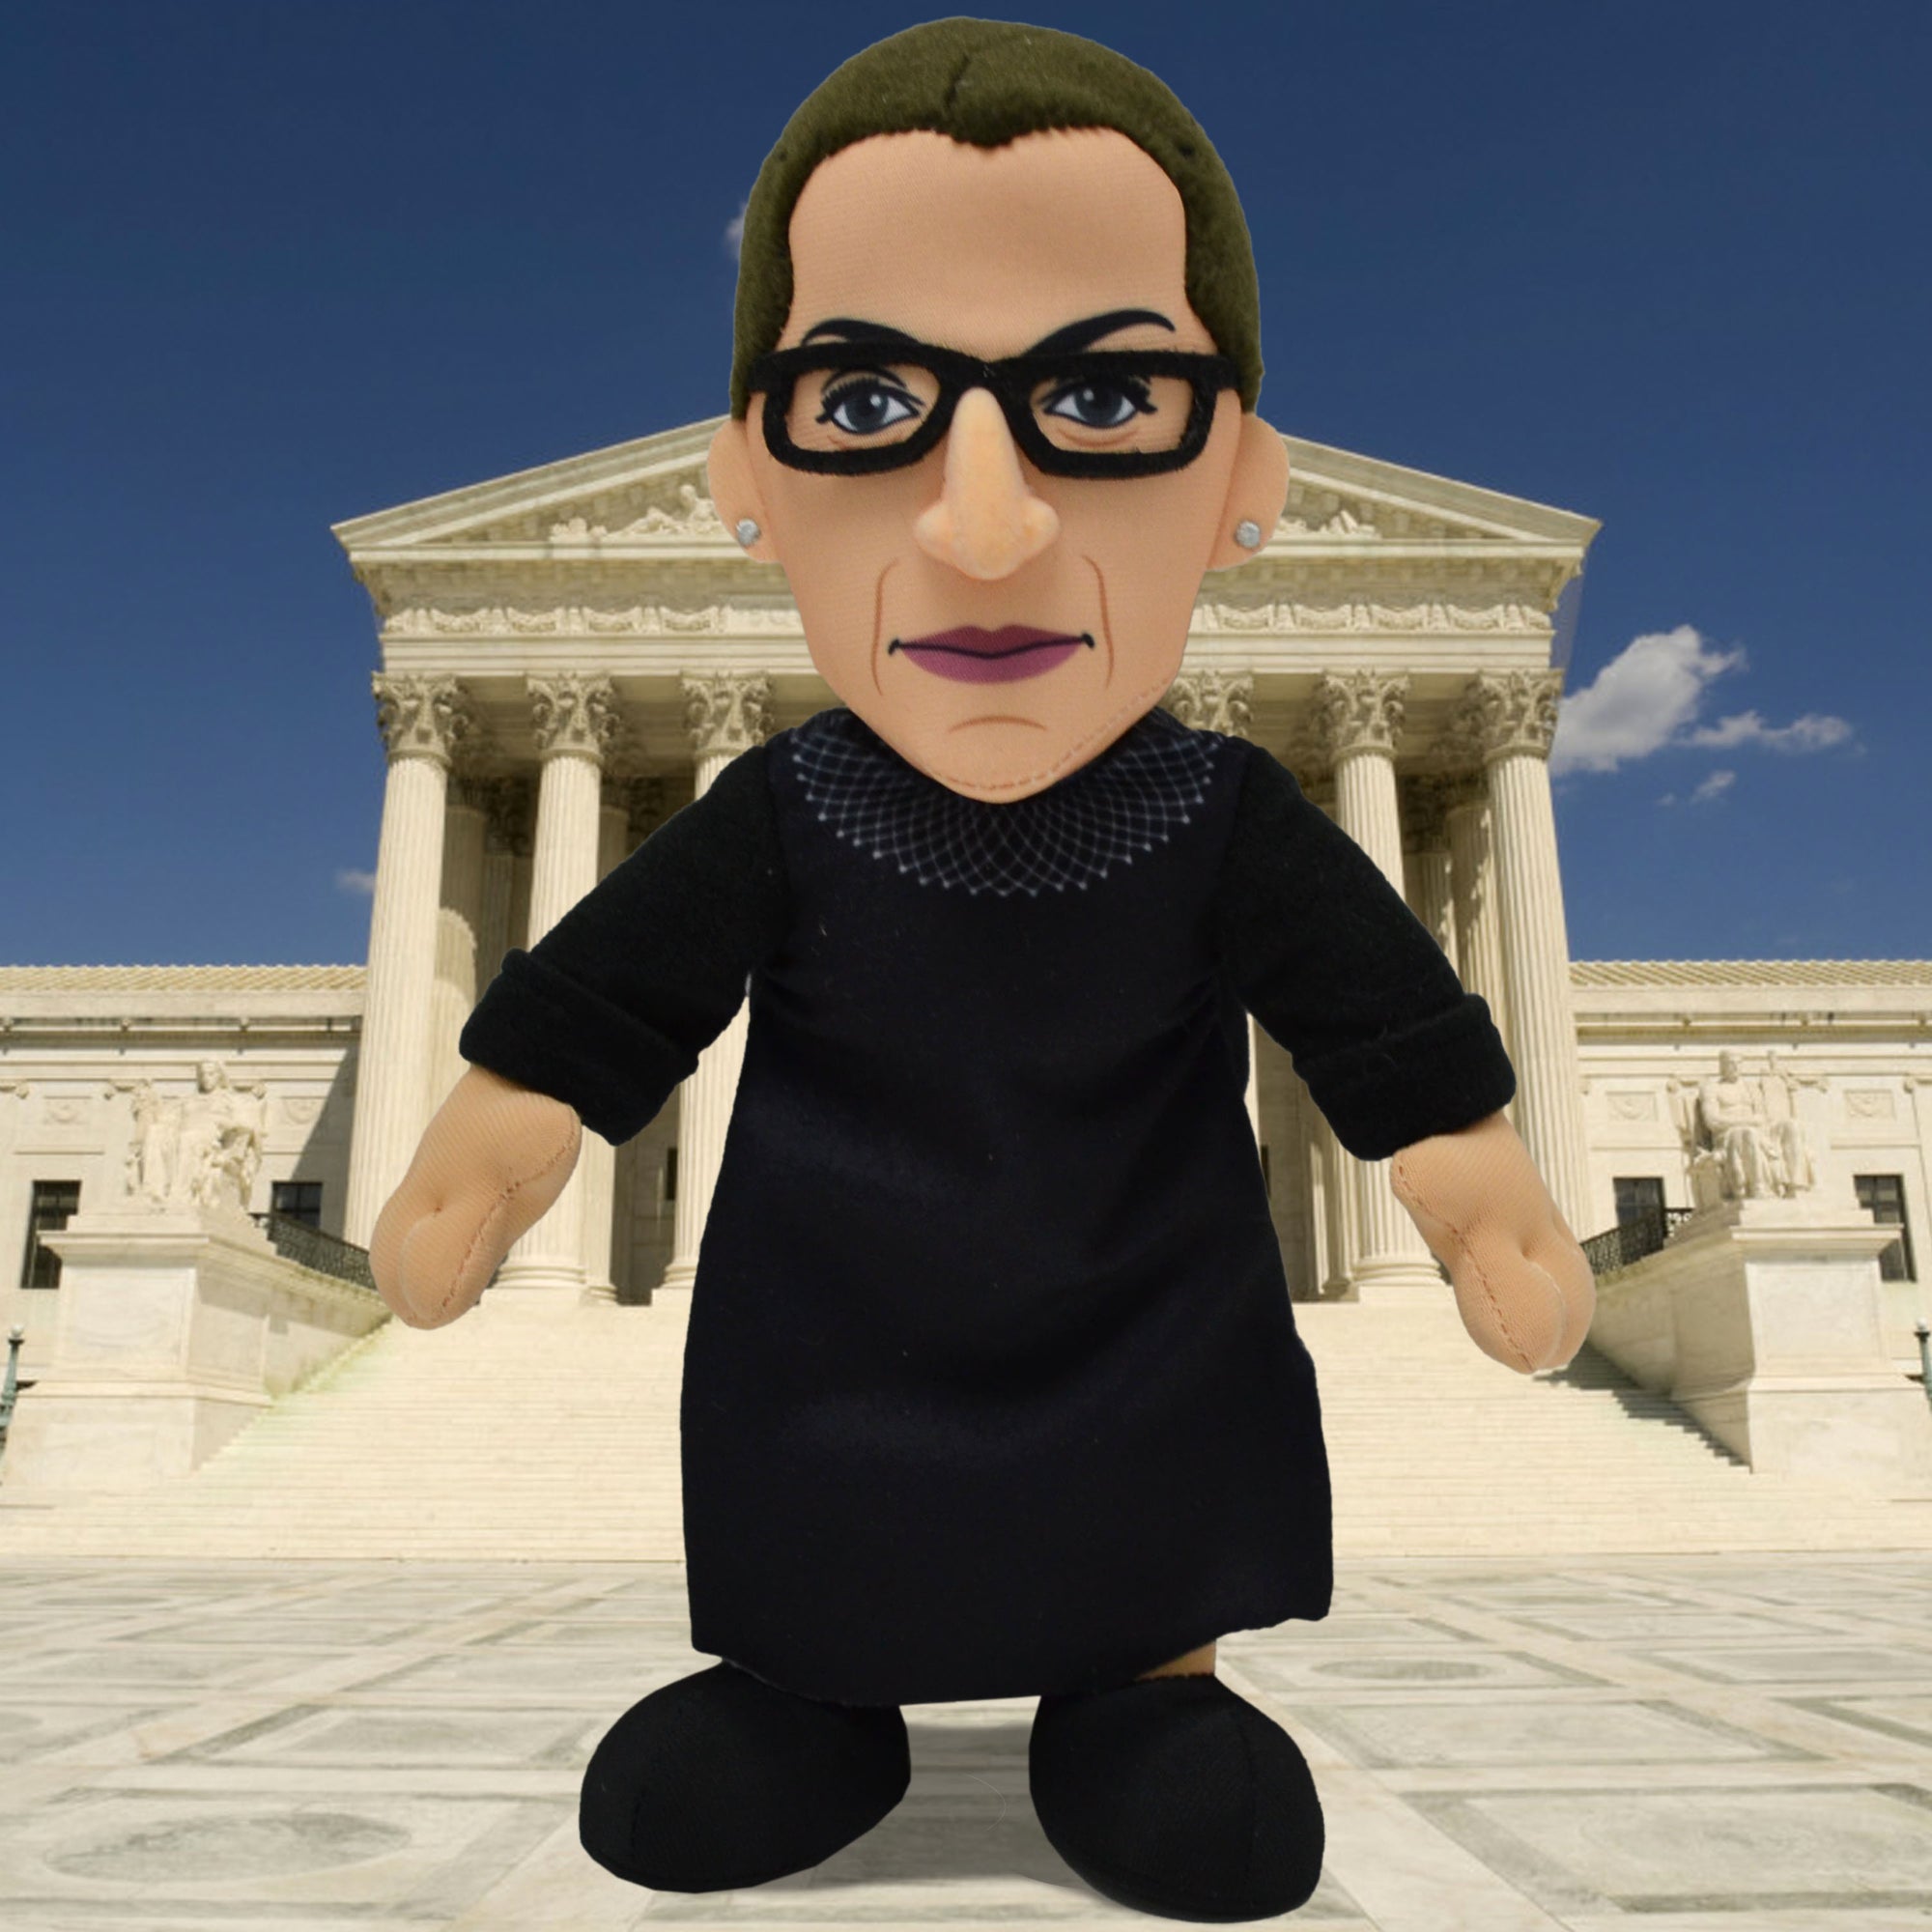 HERE COMES THE JUDGE! RBG JOINS THE BLEACHER CREATURES TEAM OF BELOVED PERSONALITIES